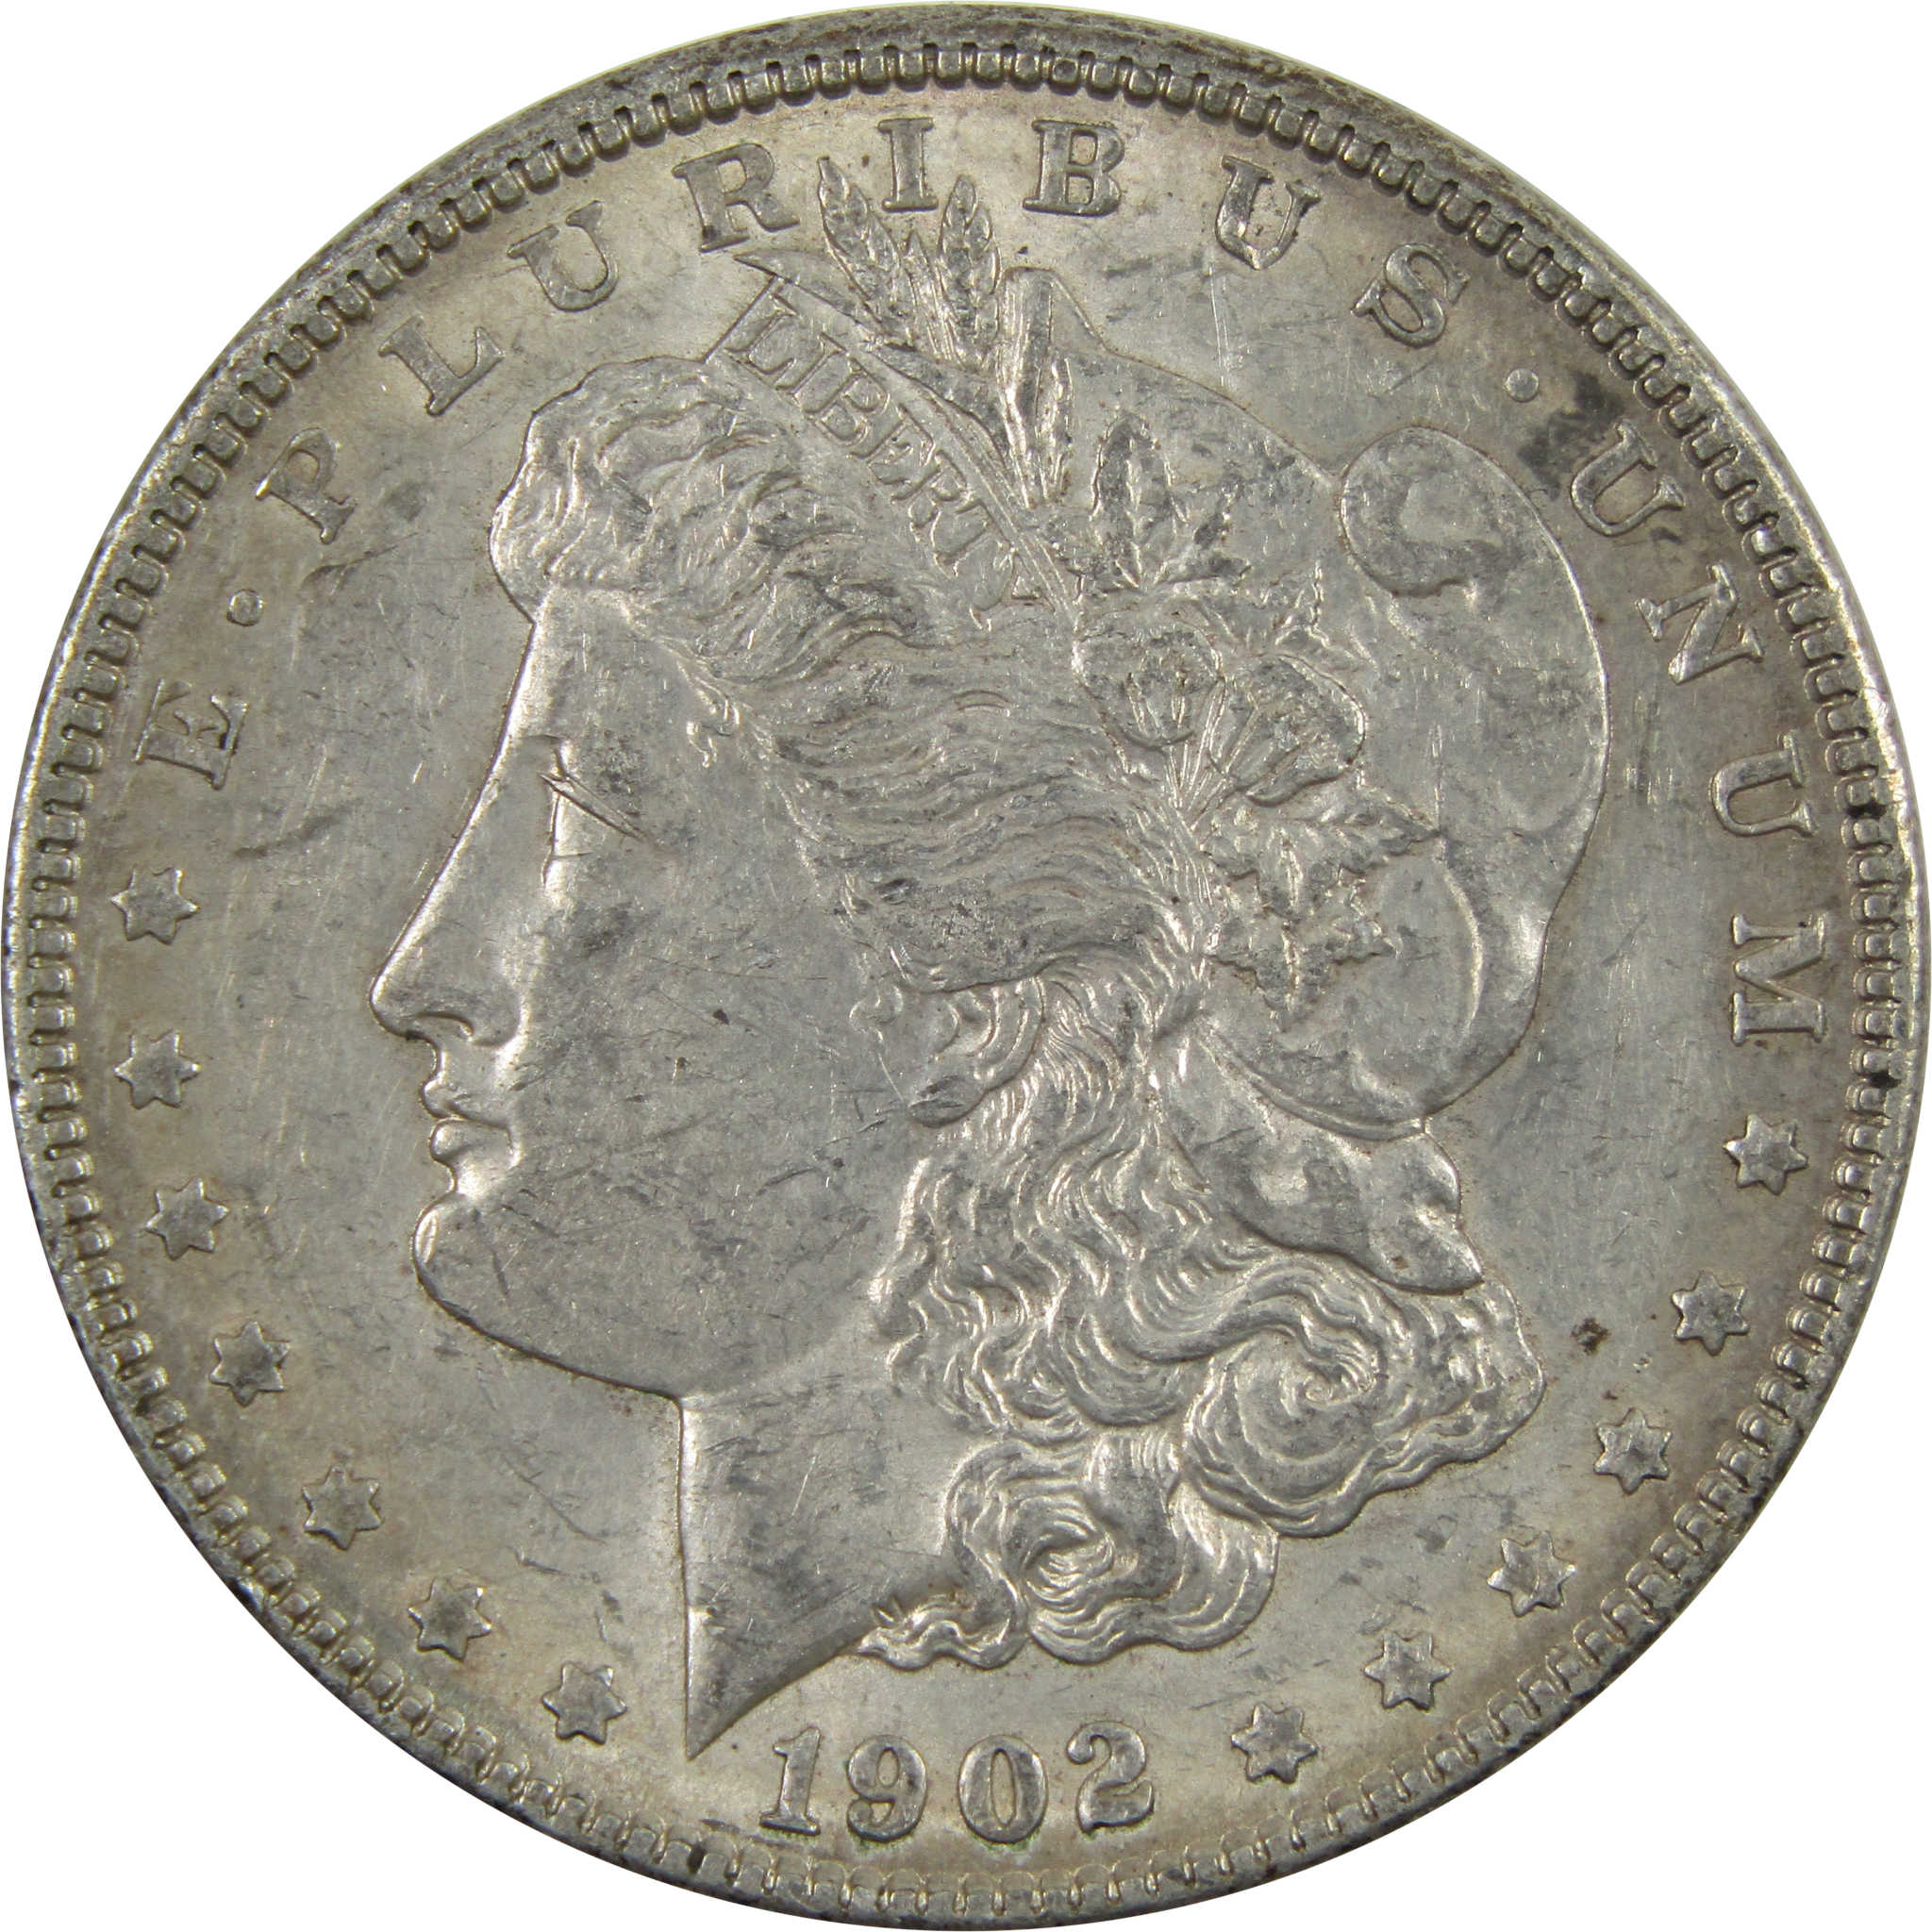 1902 Morgan Dollar AU About Uncirculated 90% Silver $1 Coin SKU:I4742 - Morgan coin - Morgan silver dollar - Morgan silver dollar for sale - Profile Coins &amp; Collectibles